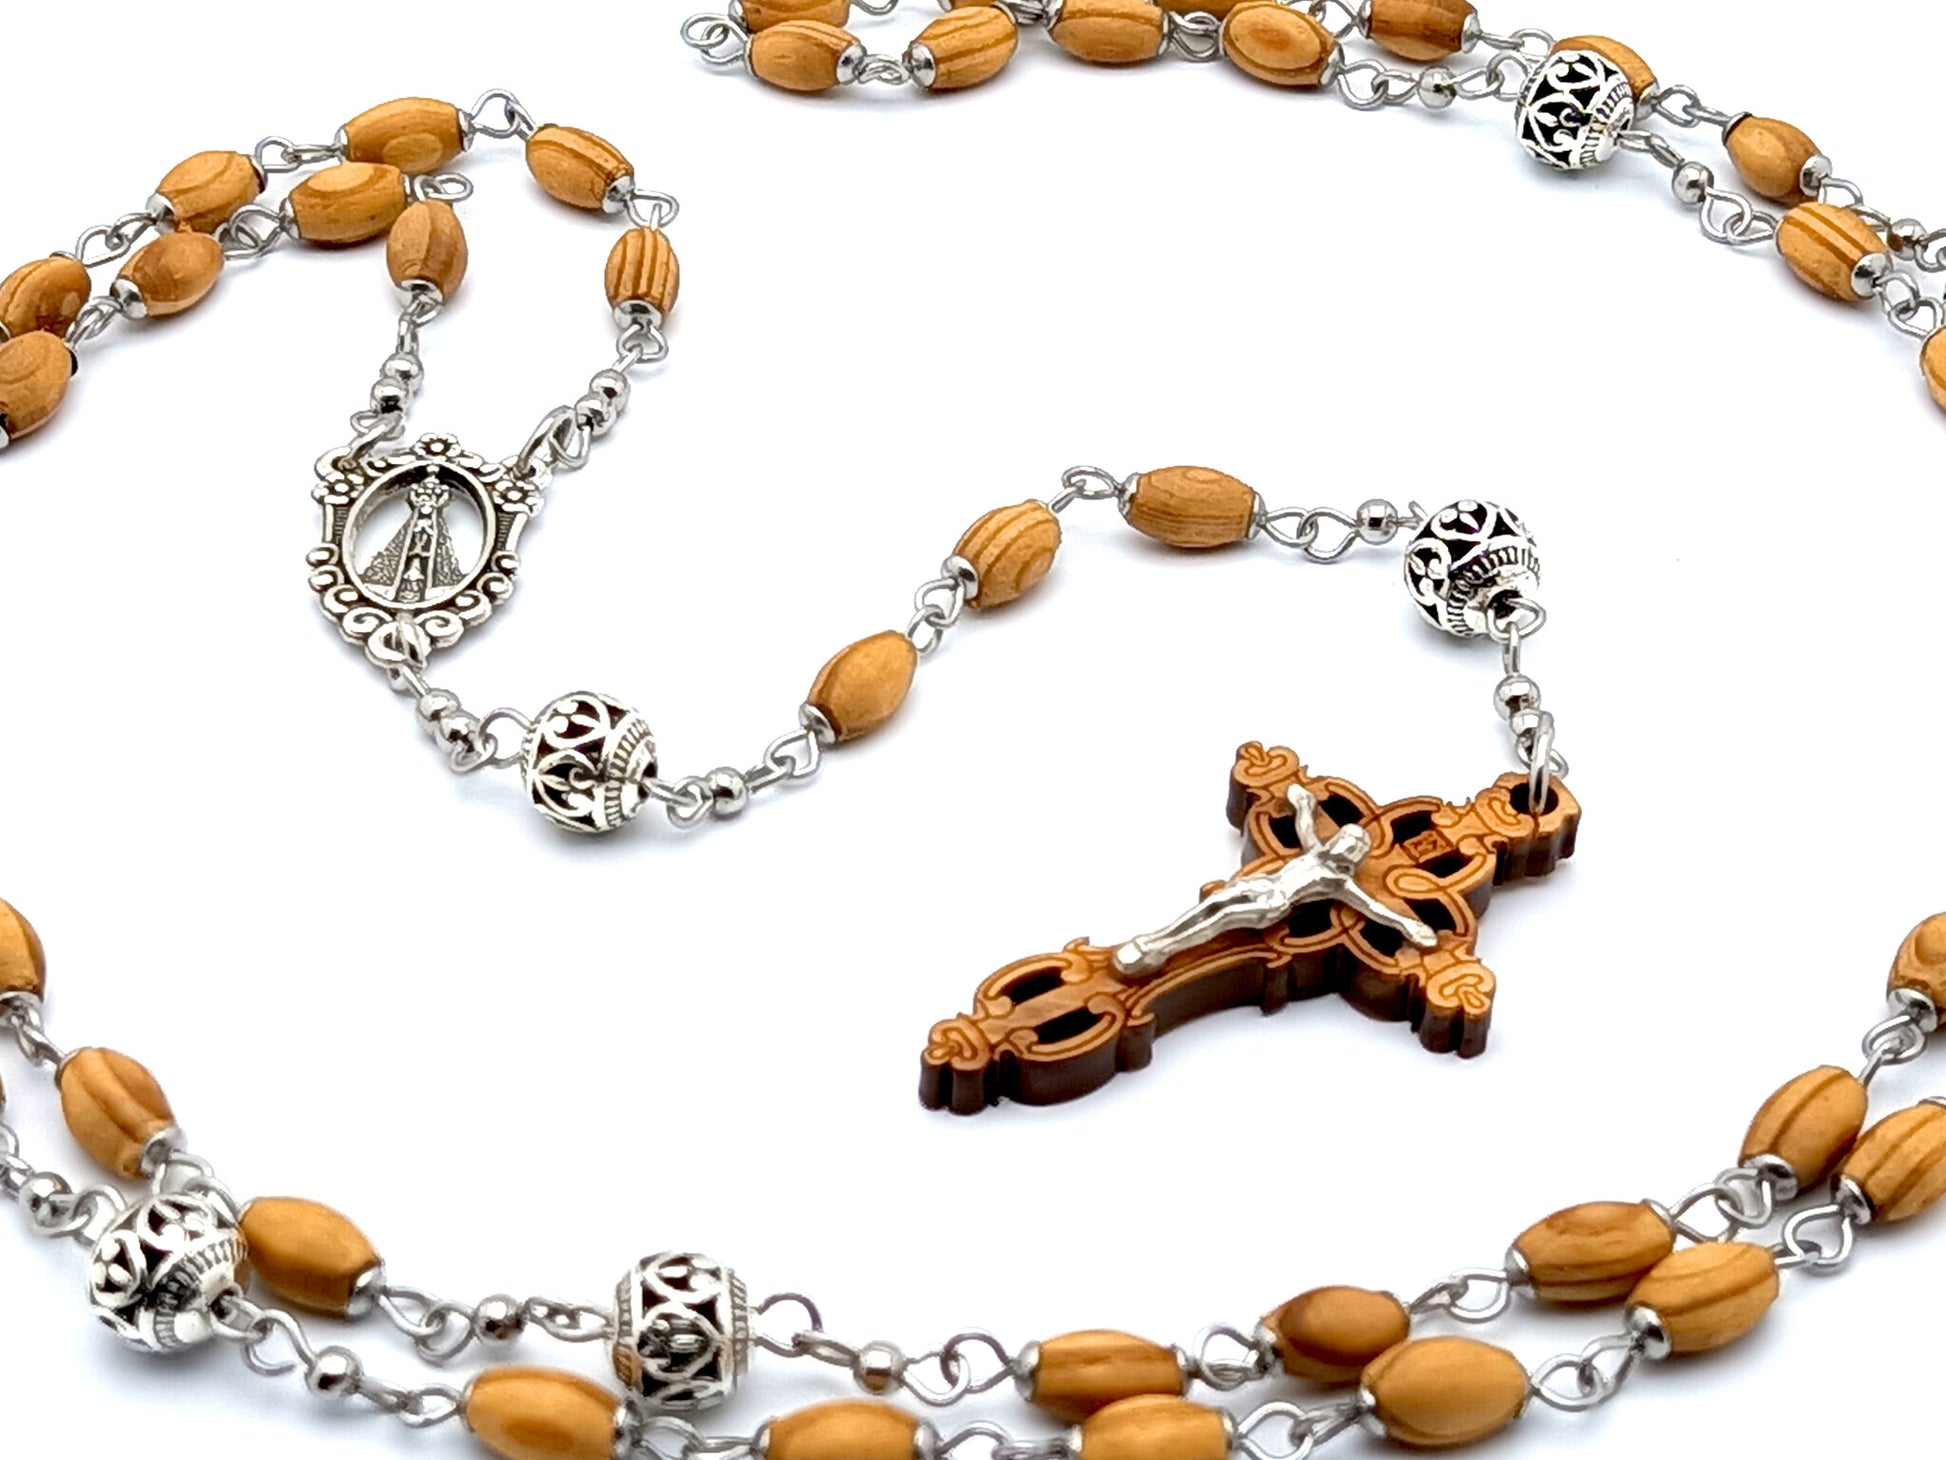 Our Lady of Charity unique rosary beads with wooden and Tibetan silver beads and Jerusalem olive wood laser cut crucifix.